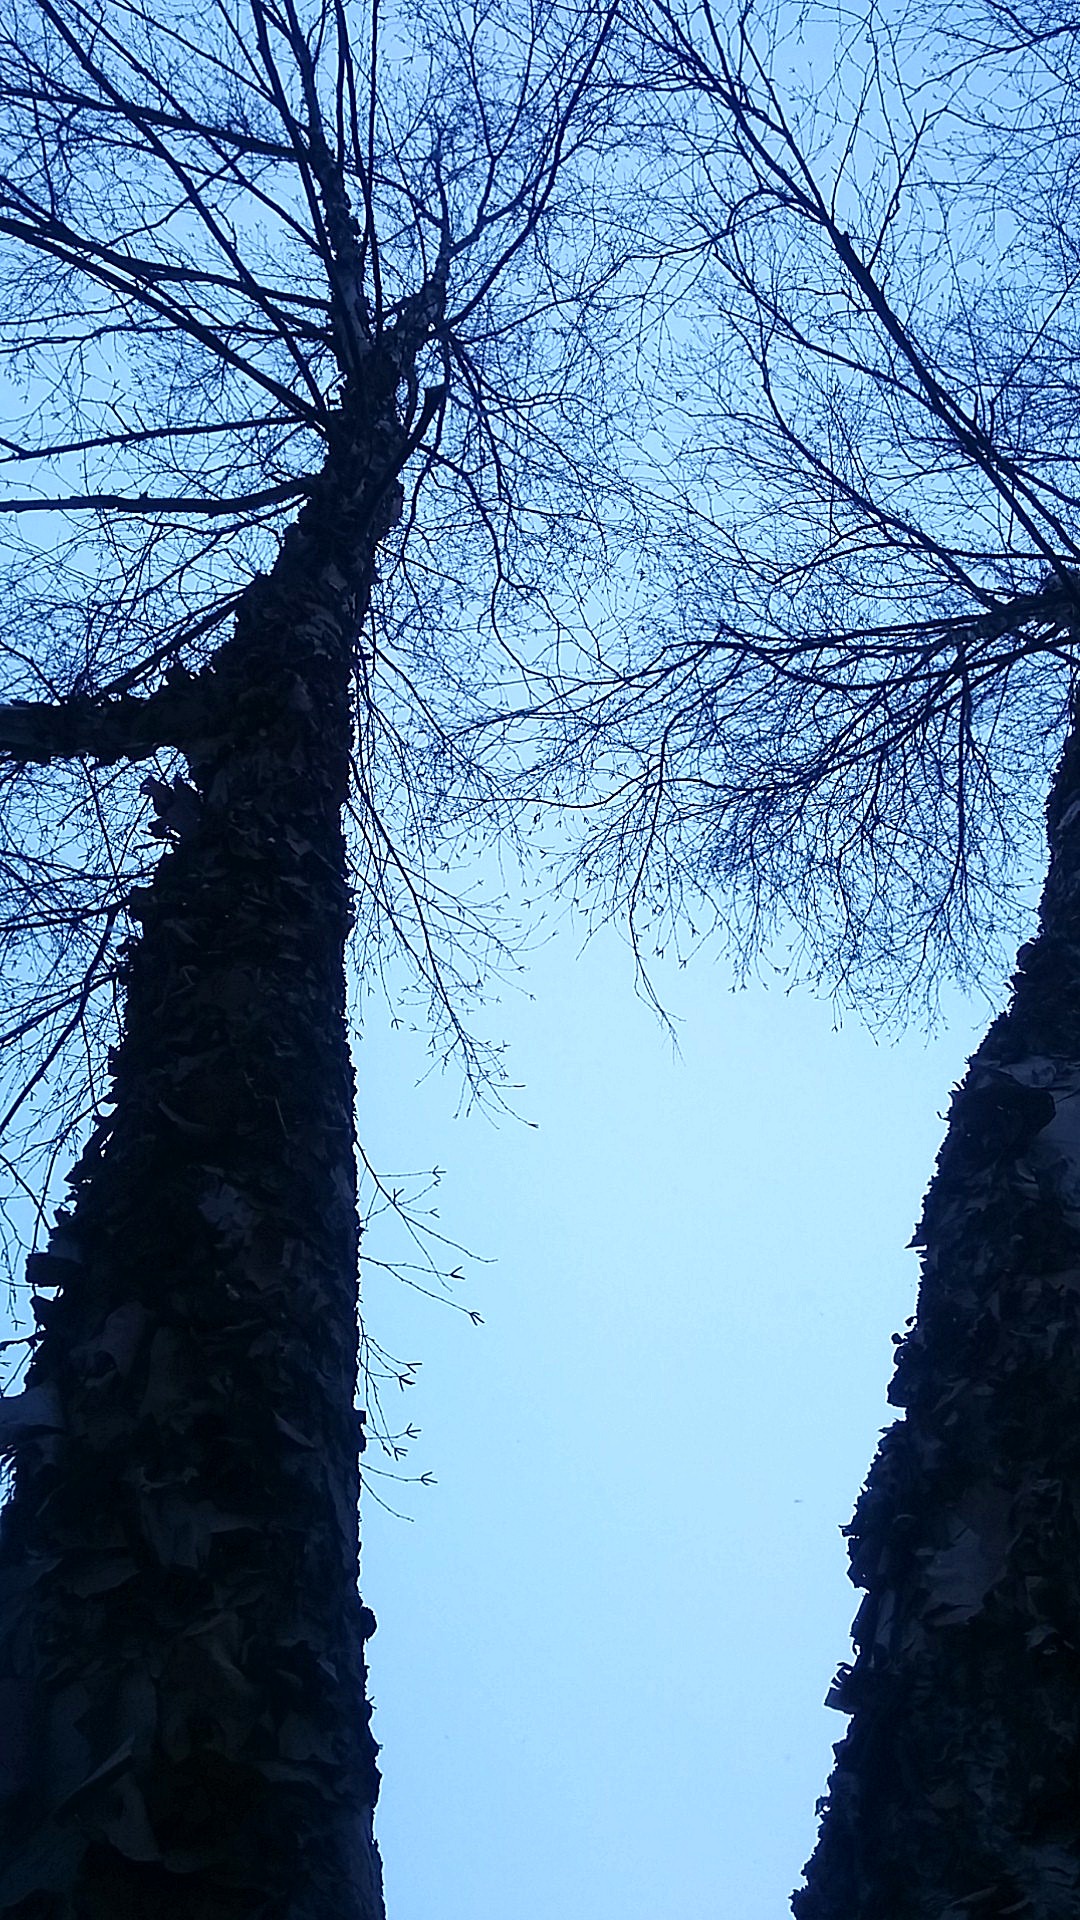 Looking up at two tall birch trees with peeling barks. Photo taken in Winter, so there are no leaves on the branches. The trees appear as silhouettes du to the low light of the evening. Their tops are visible, with branches extending from the barks.